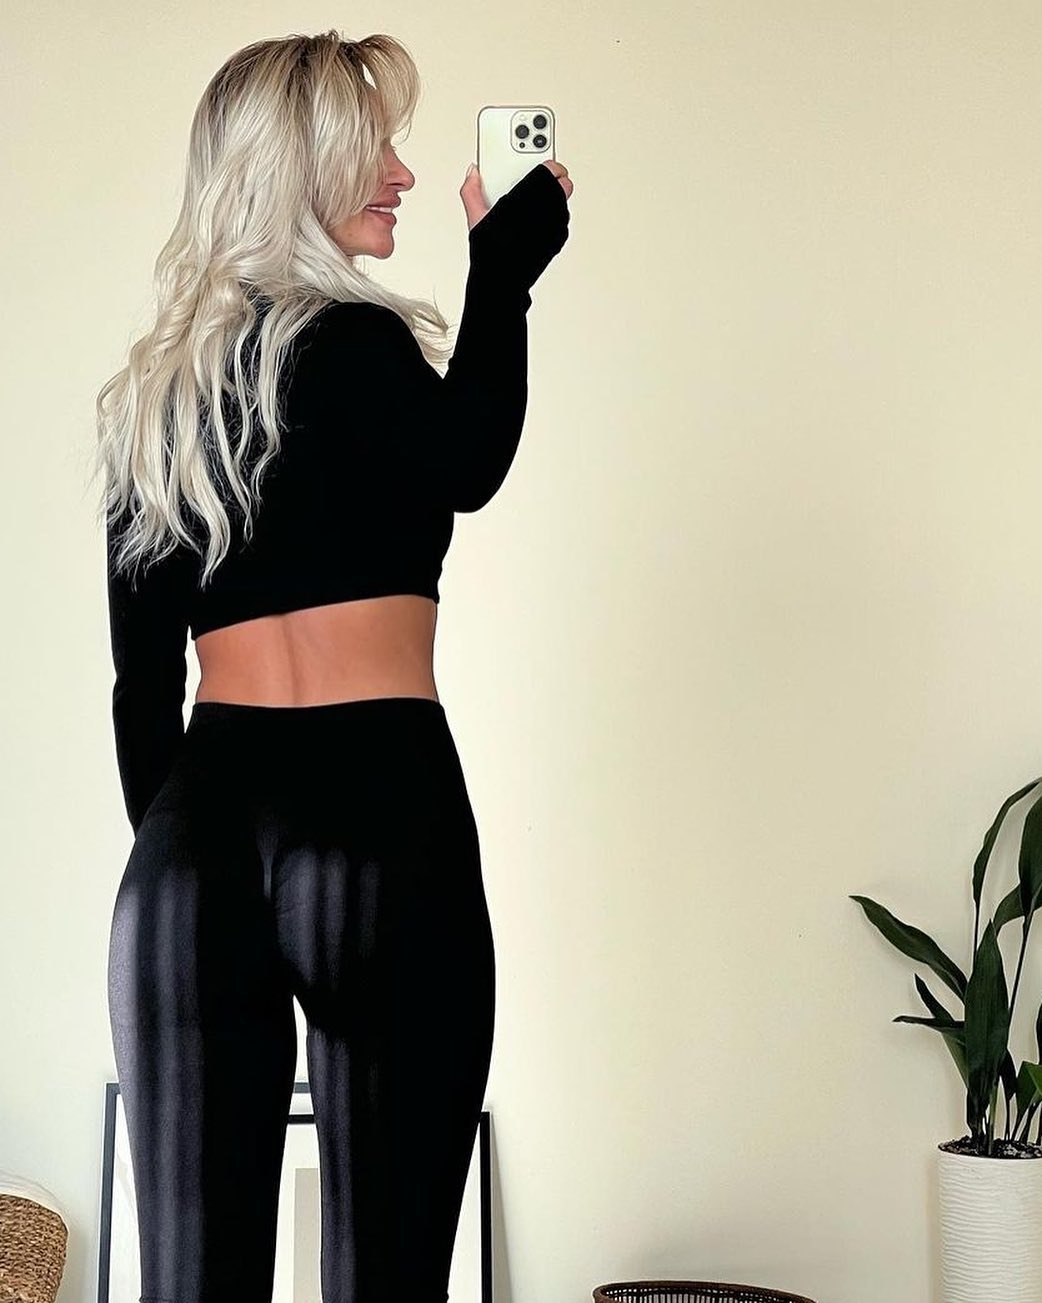 How to Properly Wash and Care for Your Leggings?